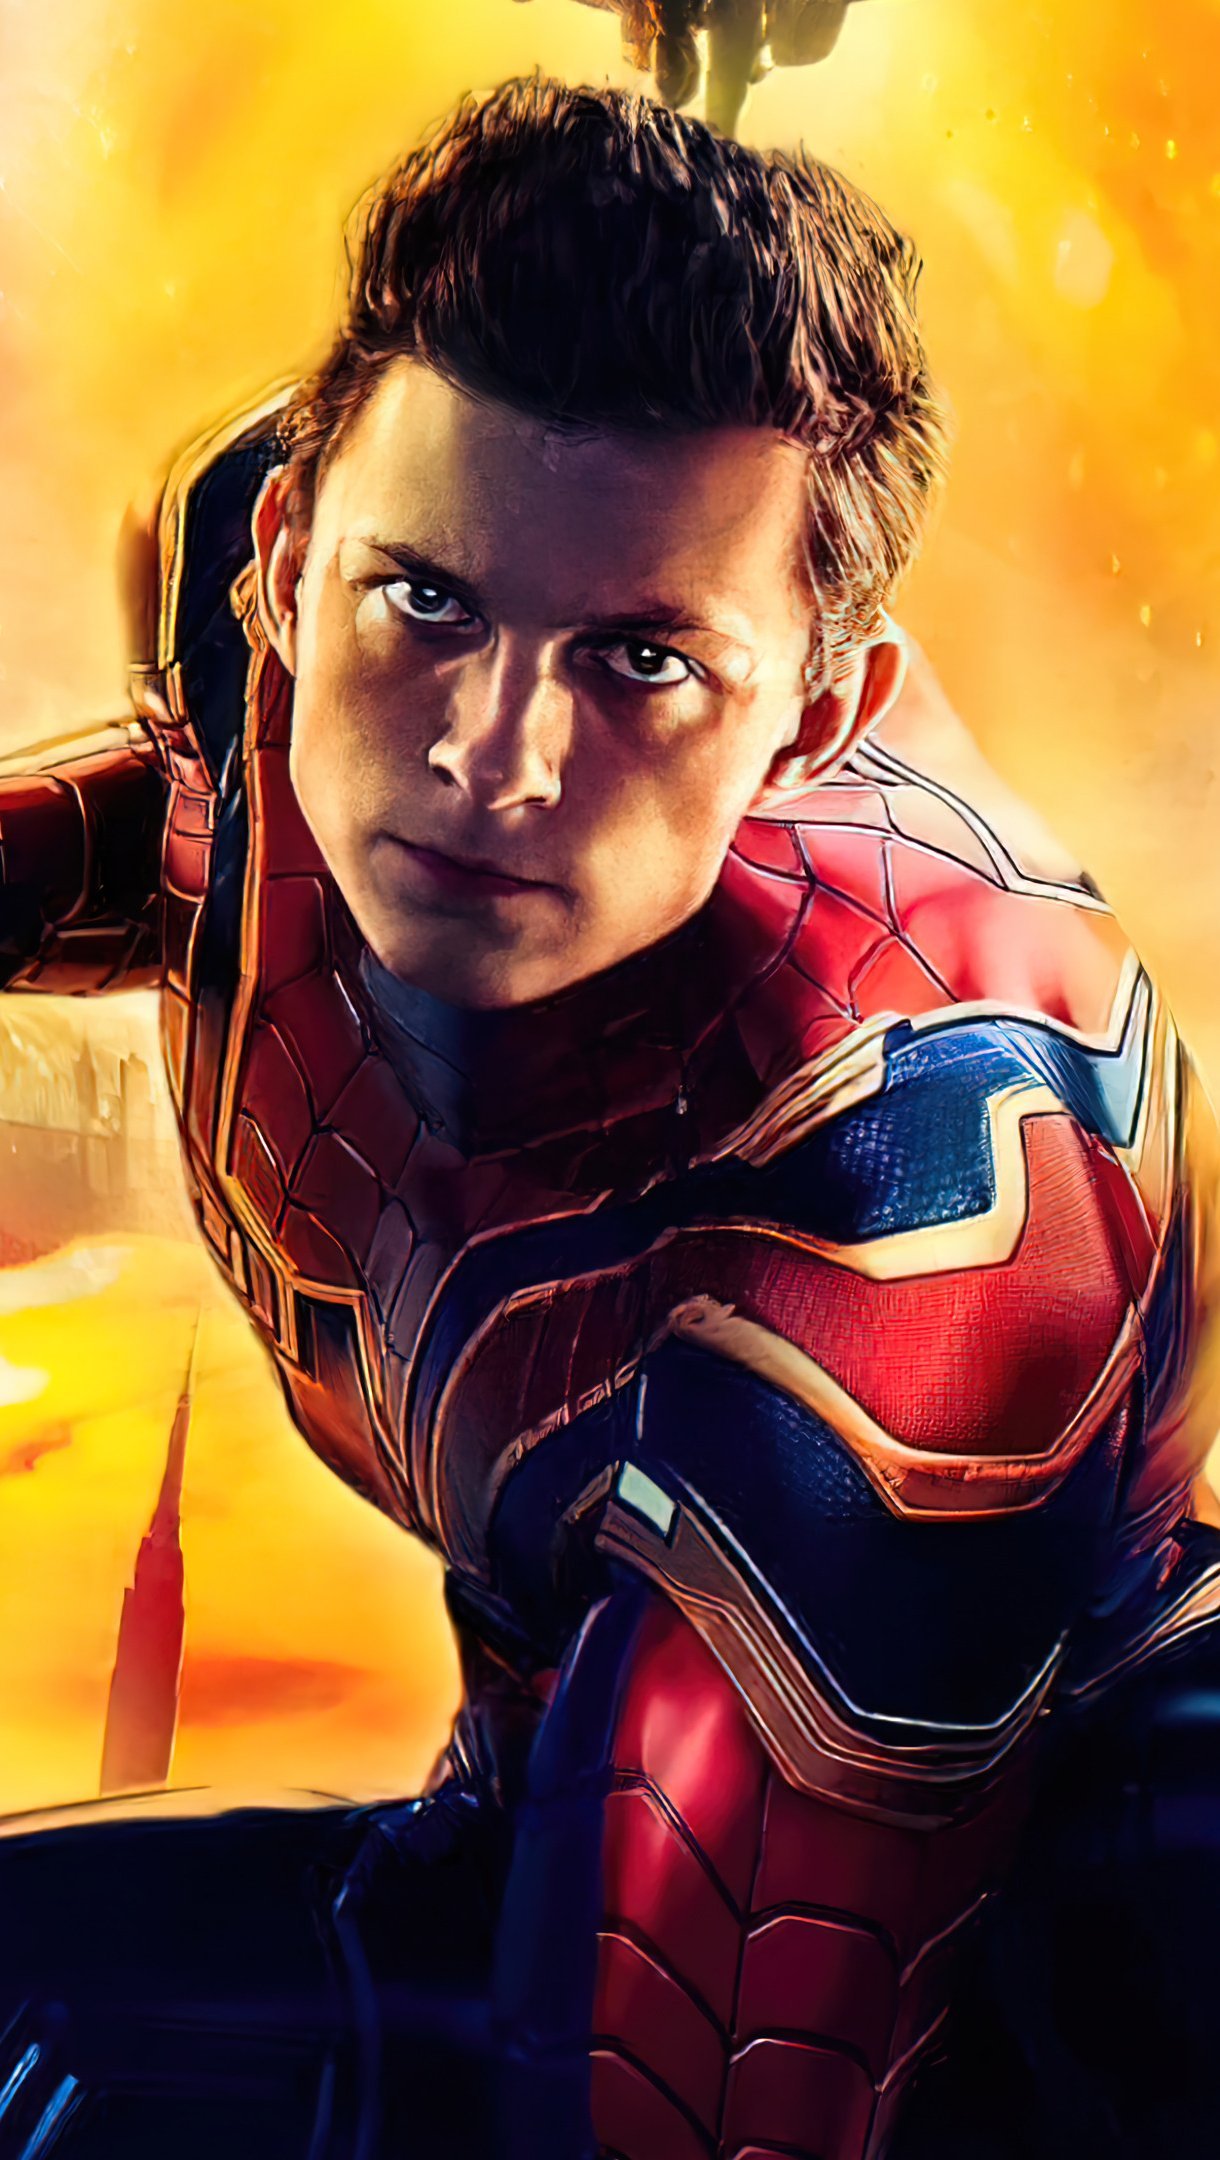 Wallpaper Tom Holland as Spider Man in No way home Vertical